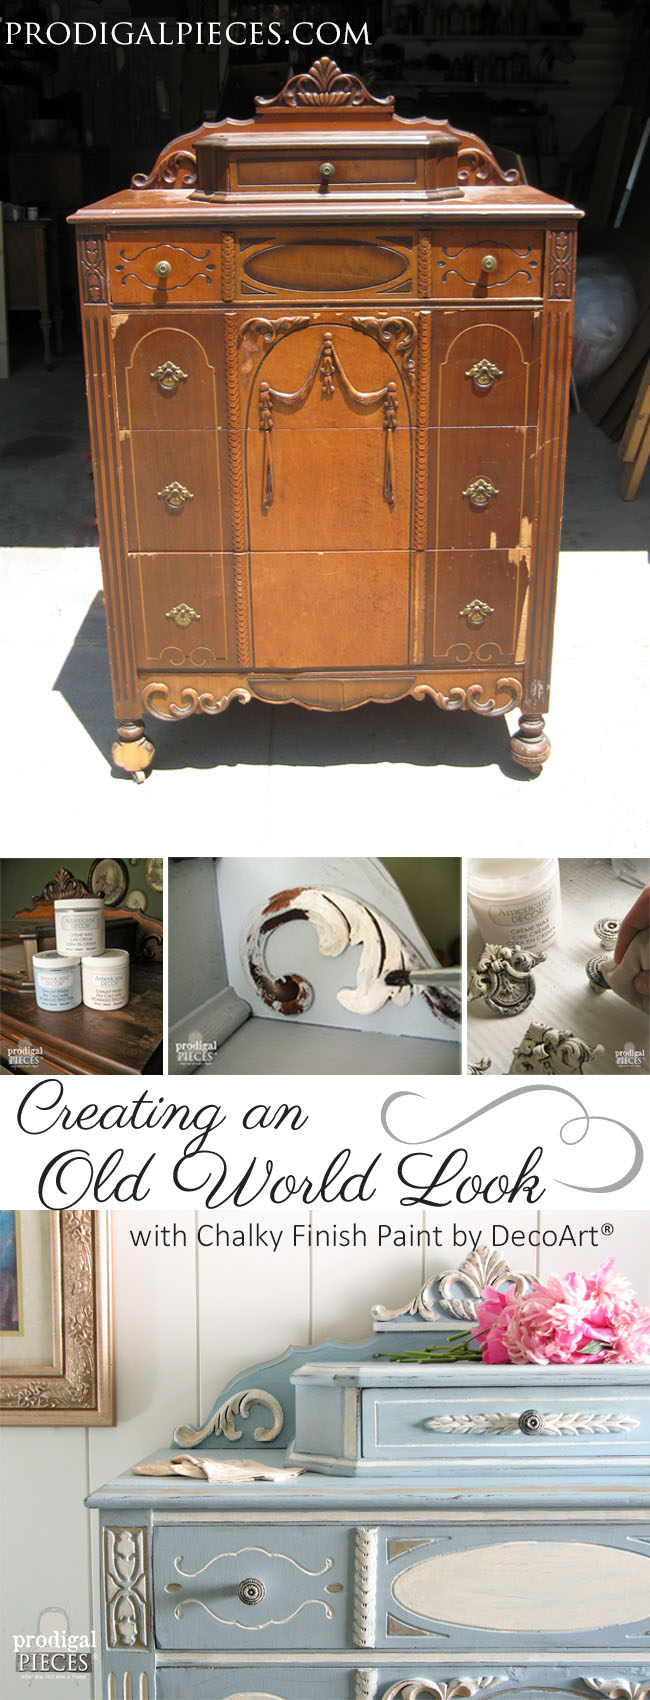 How to Create an Old World Look on Furniture | Prodigal Pieces | prodigalpieces.com